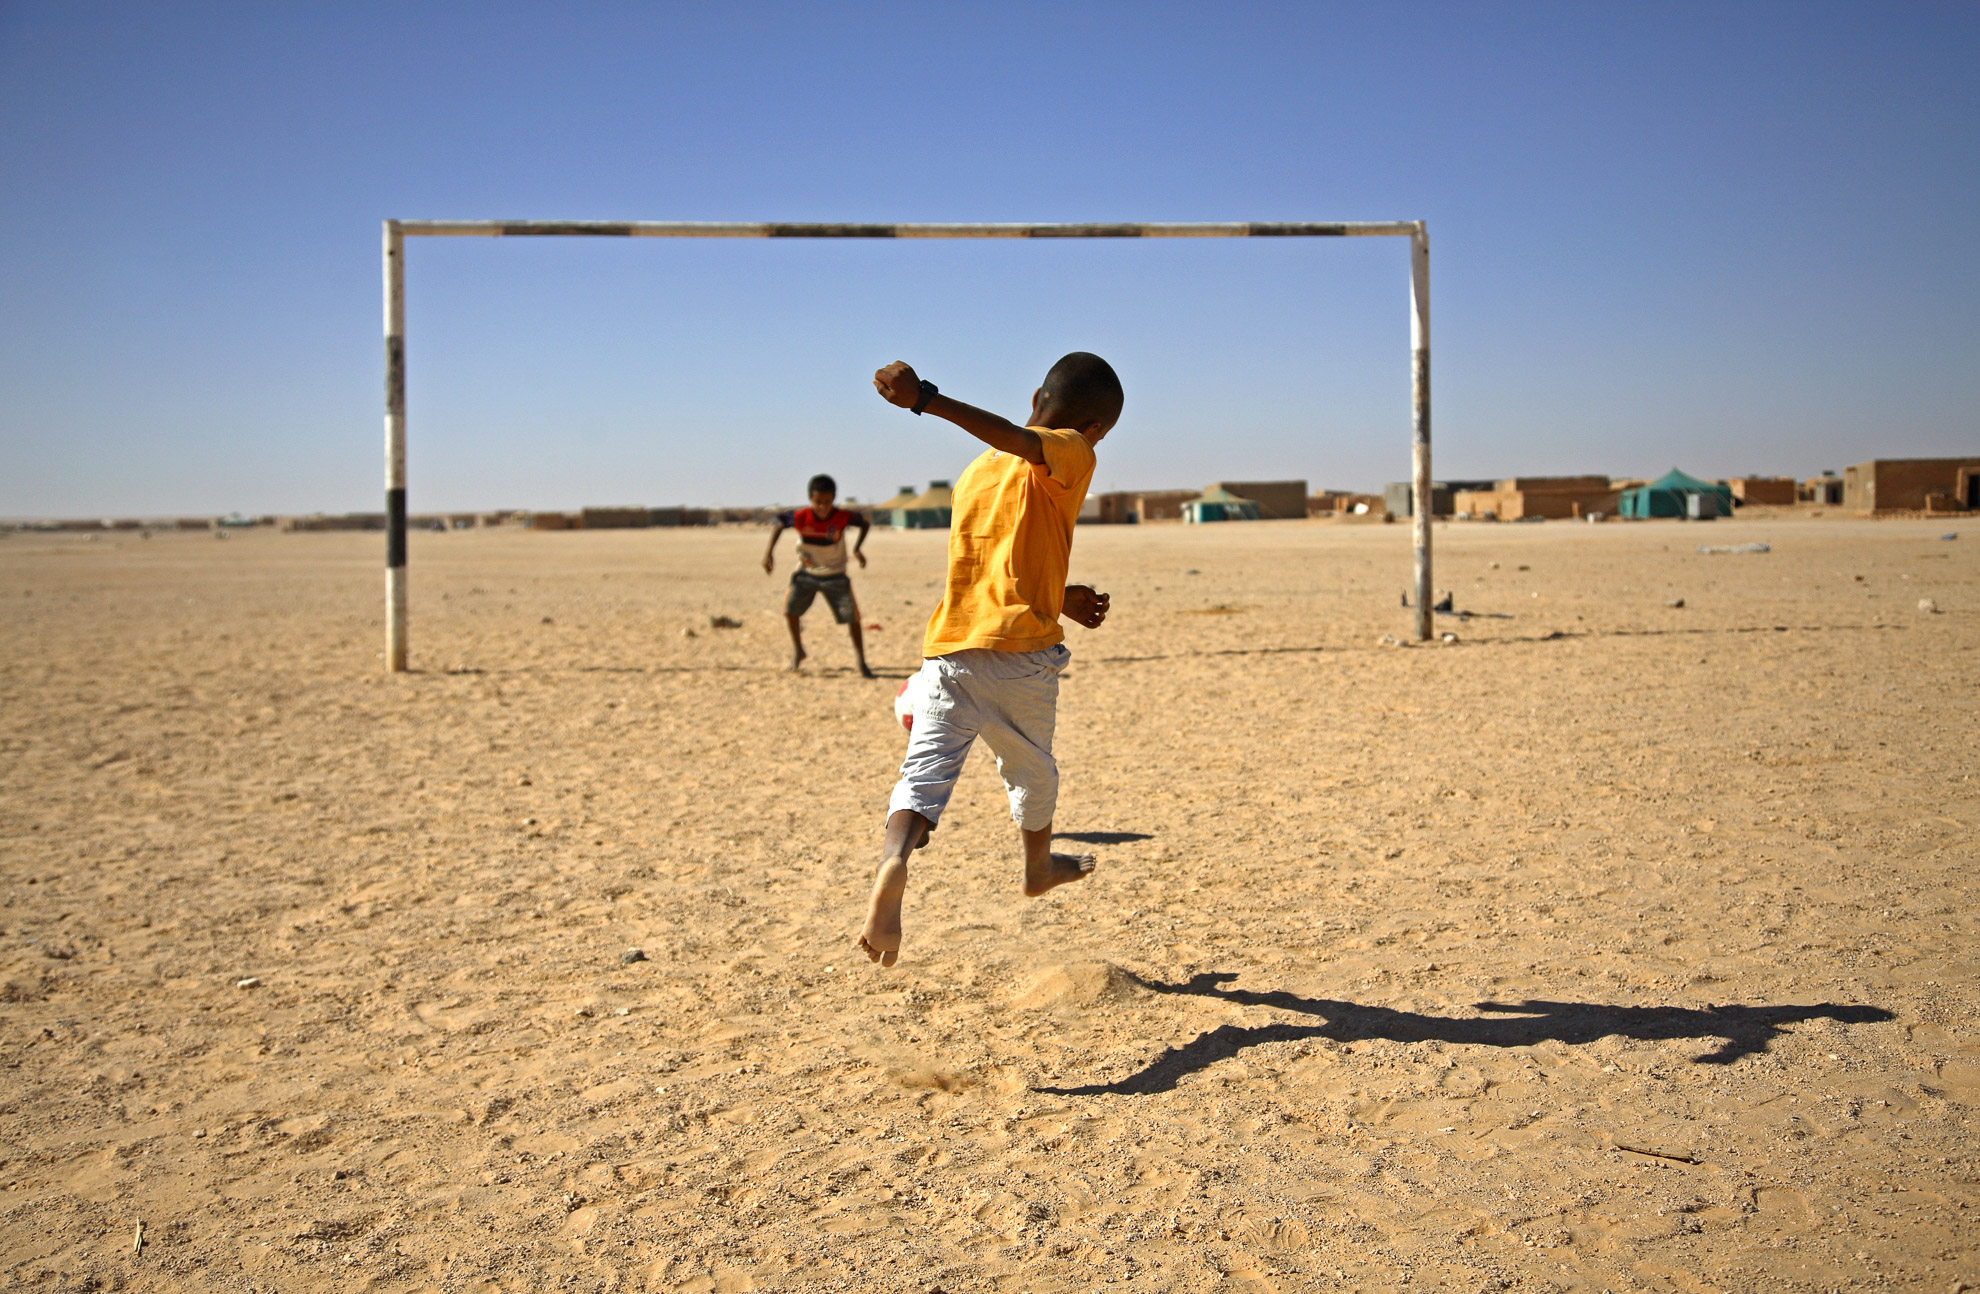 Children playing football in the scorching sun in the Sahrawi refugee camp in Smara. Football is their main pastime.